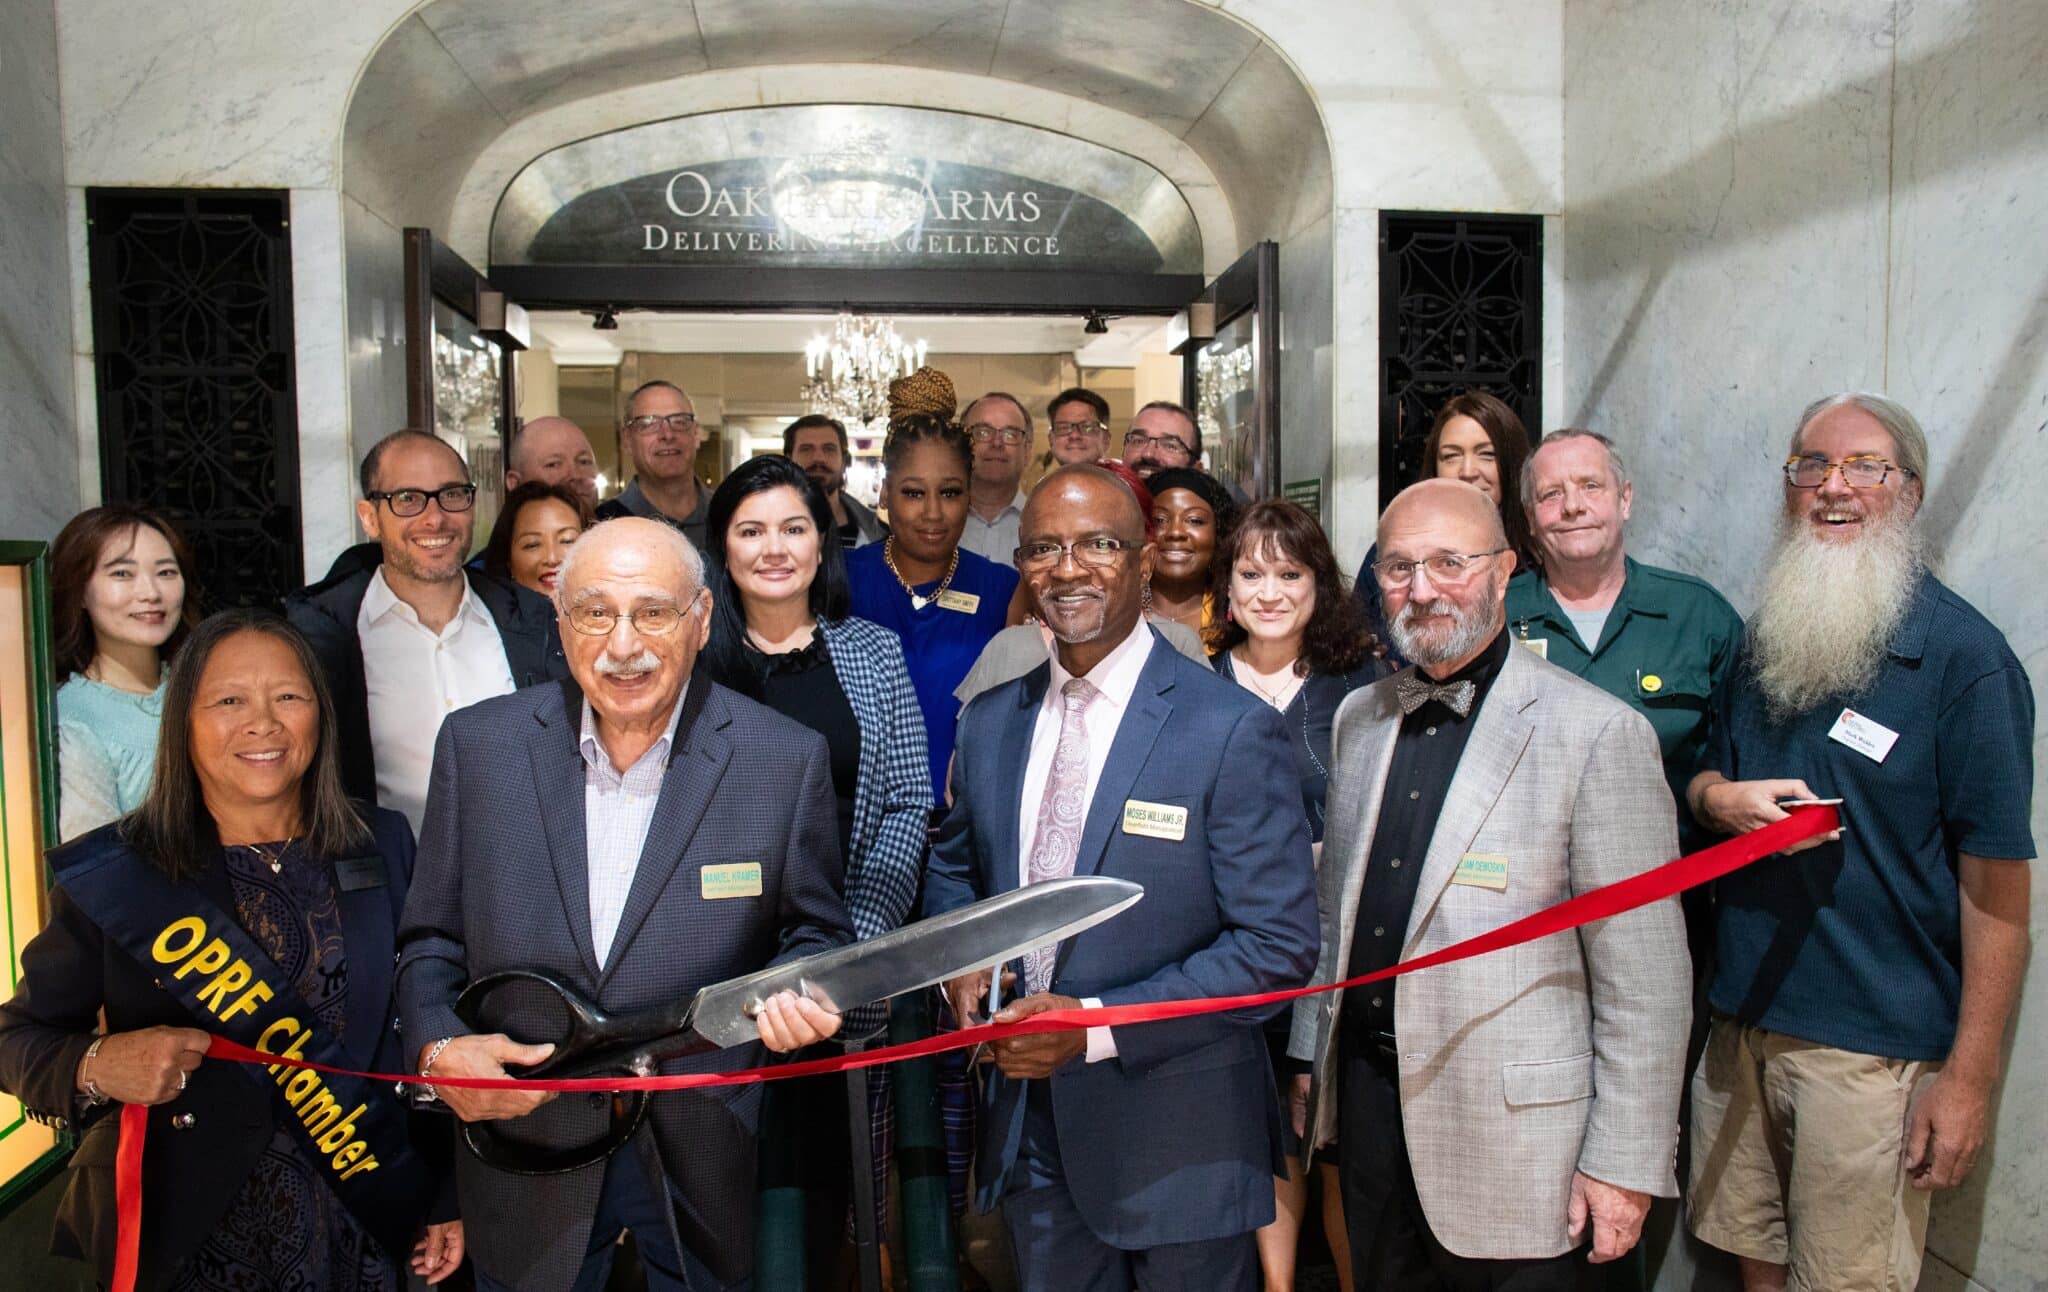 Ribbon Cutting with the Oak Park River Forest Chamber of Commerce